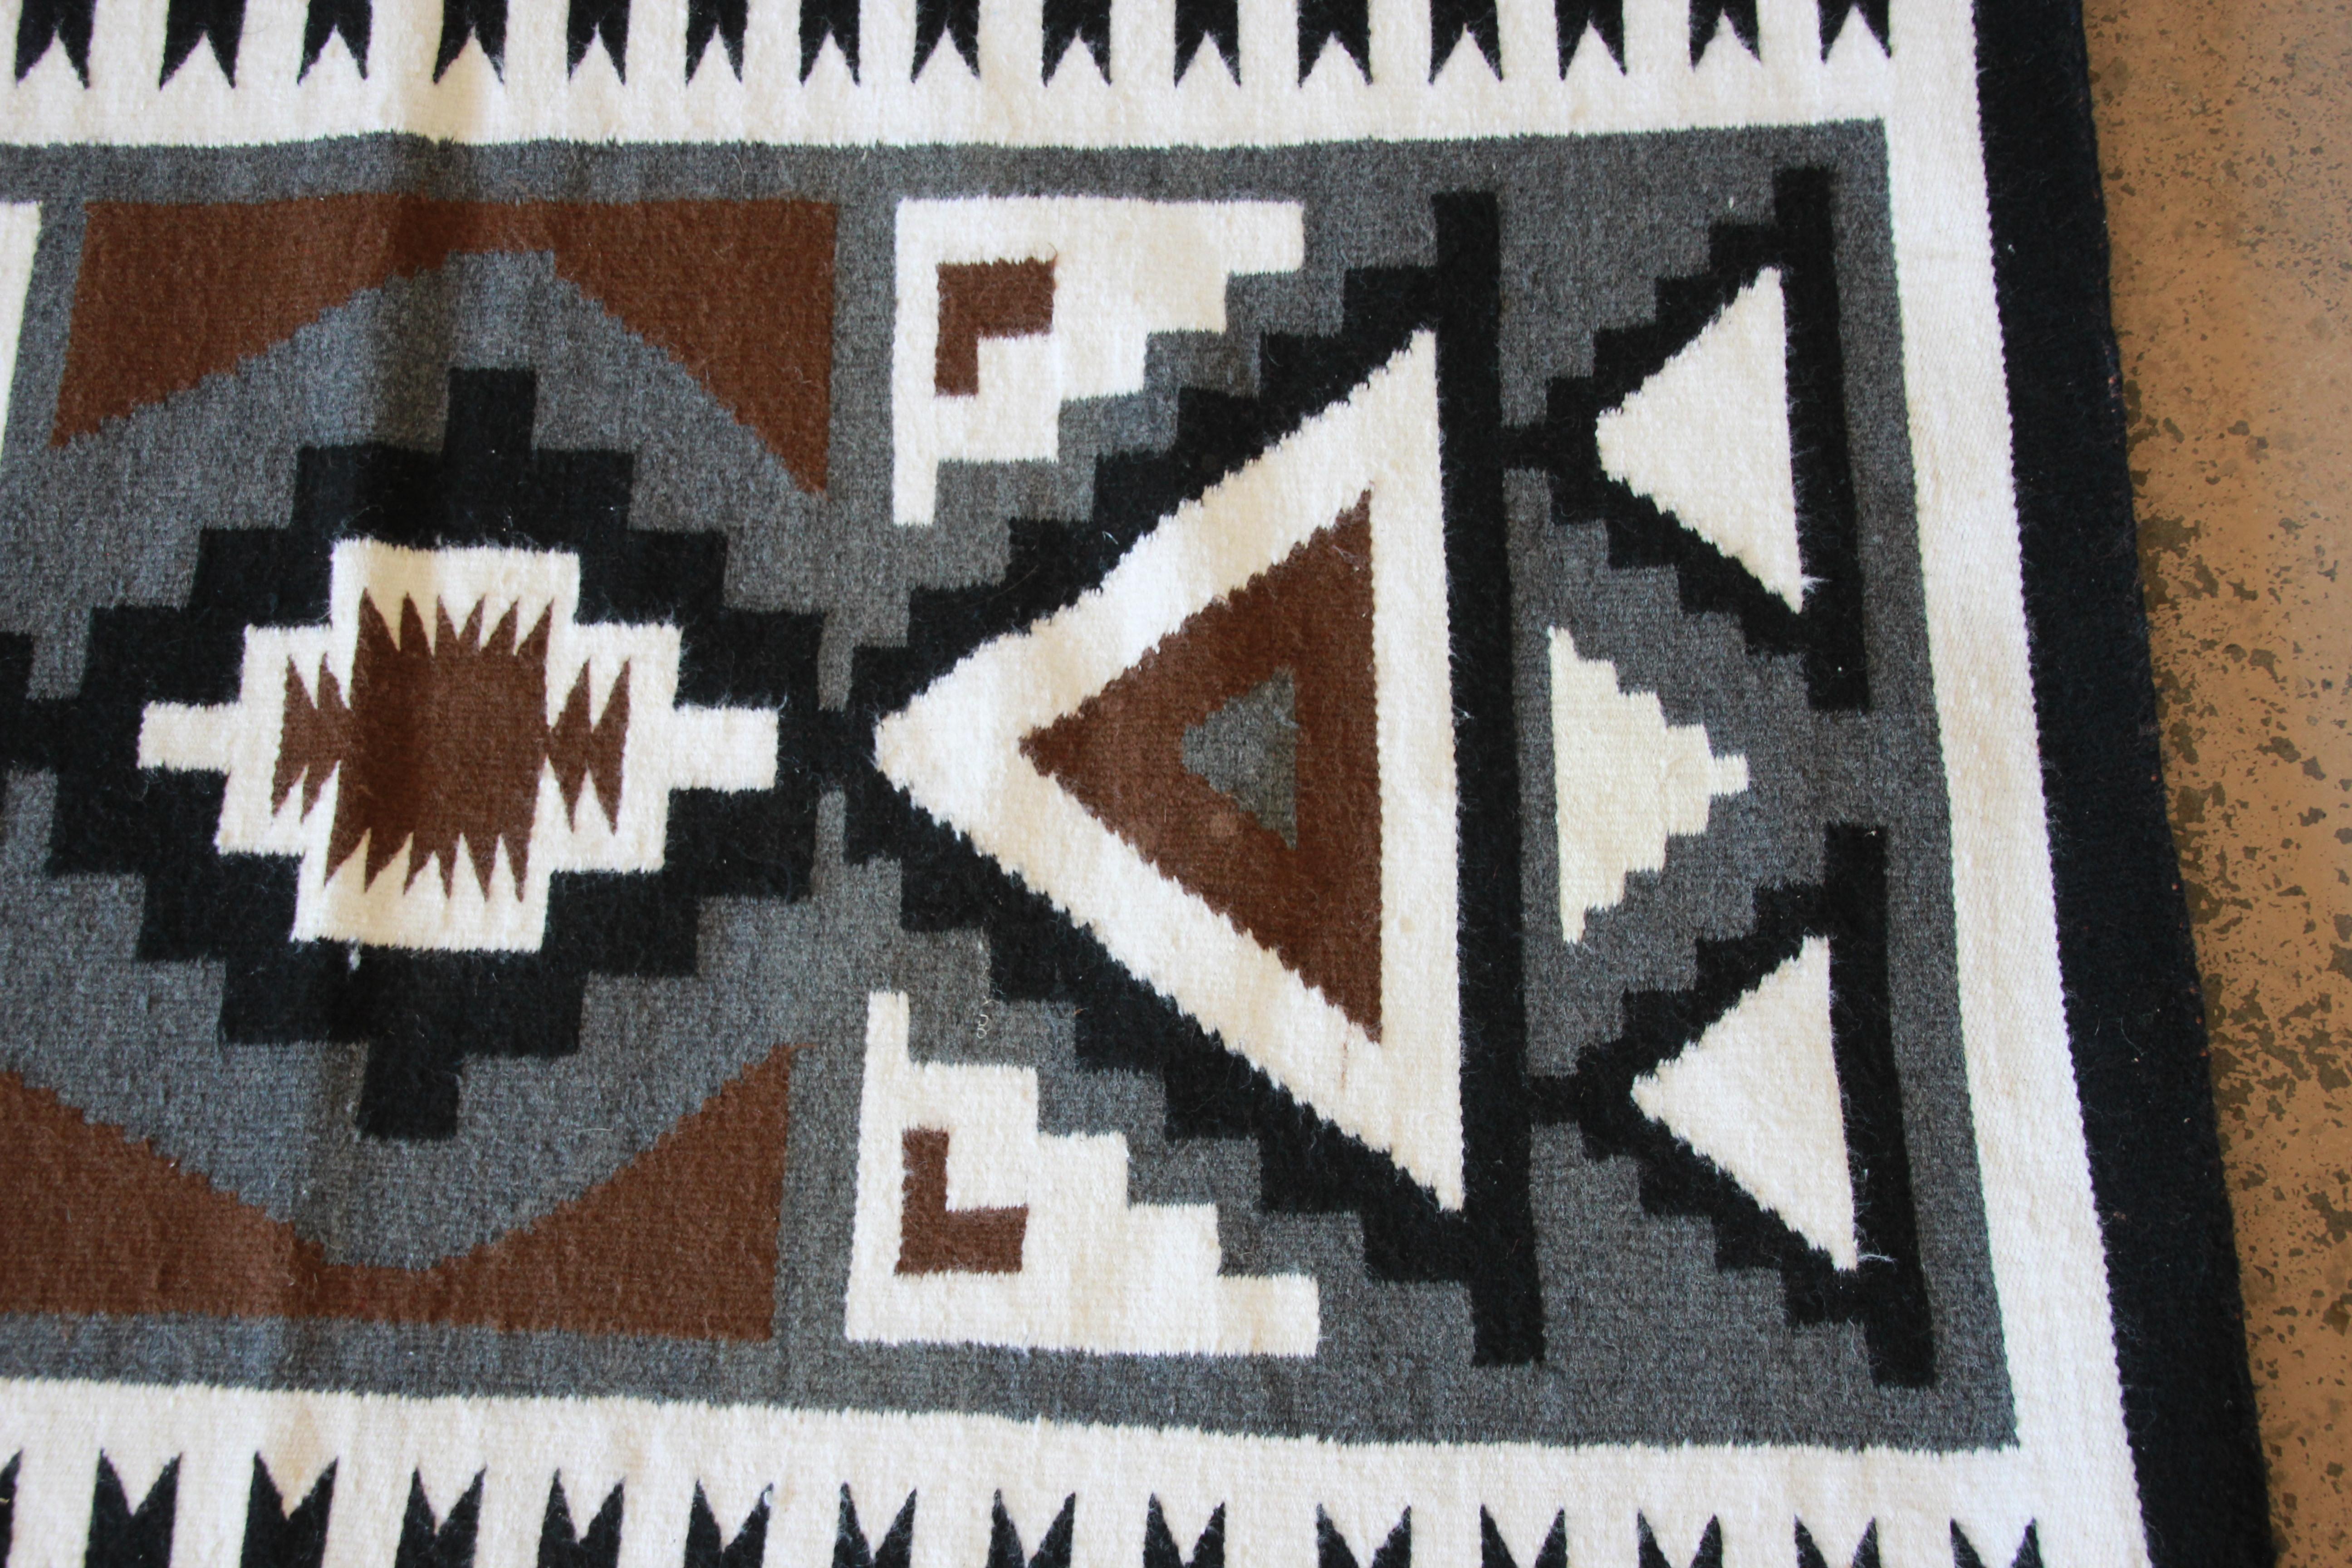 Vintage Hand-Woven Navajo Rug in Black, White, Brown, and Gray, Circa 1950s In Good Condition For Sale In South Bend, IN